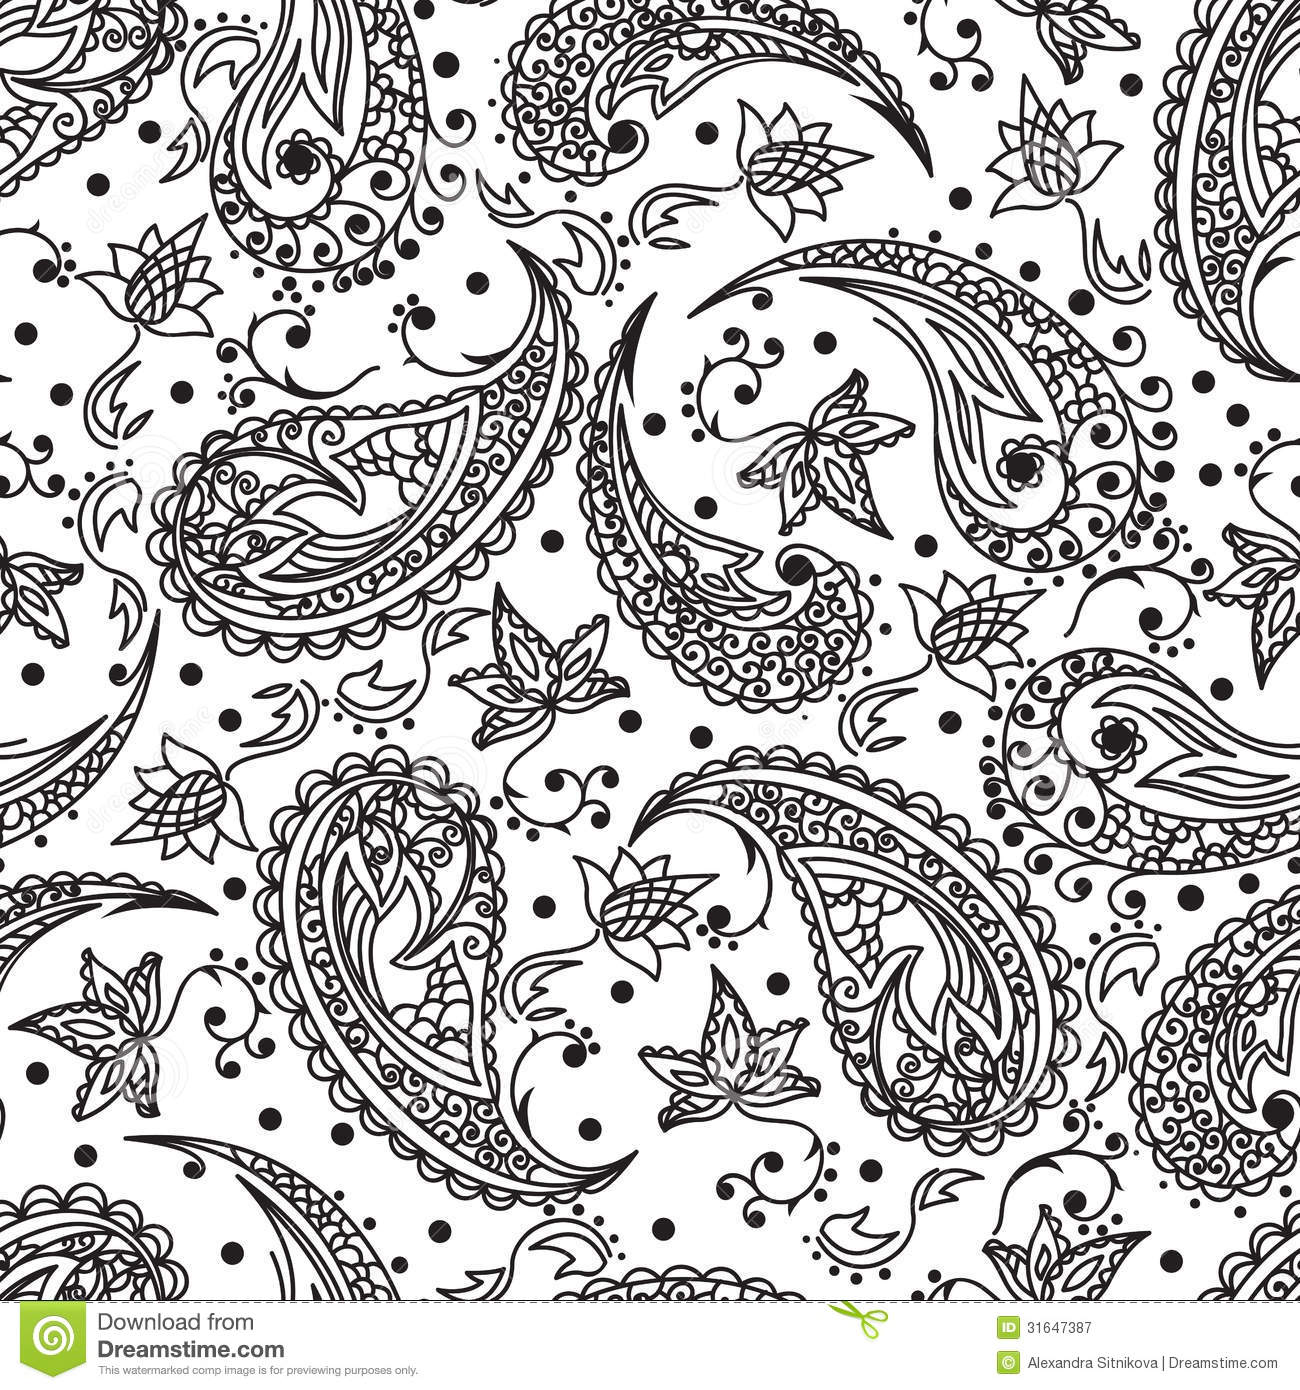 Black and White Paisley Pattern Vector